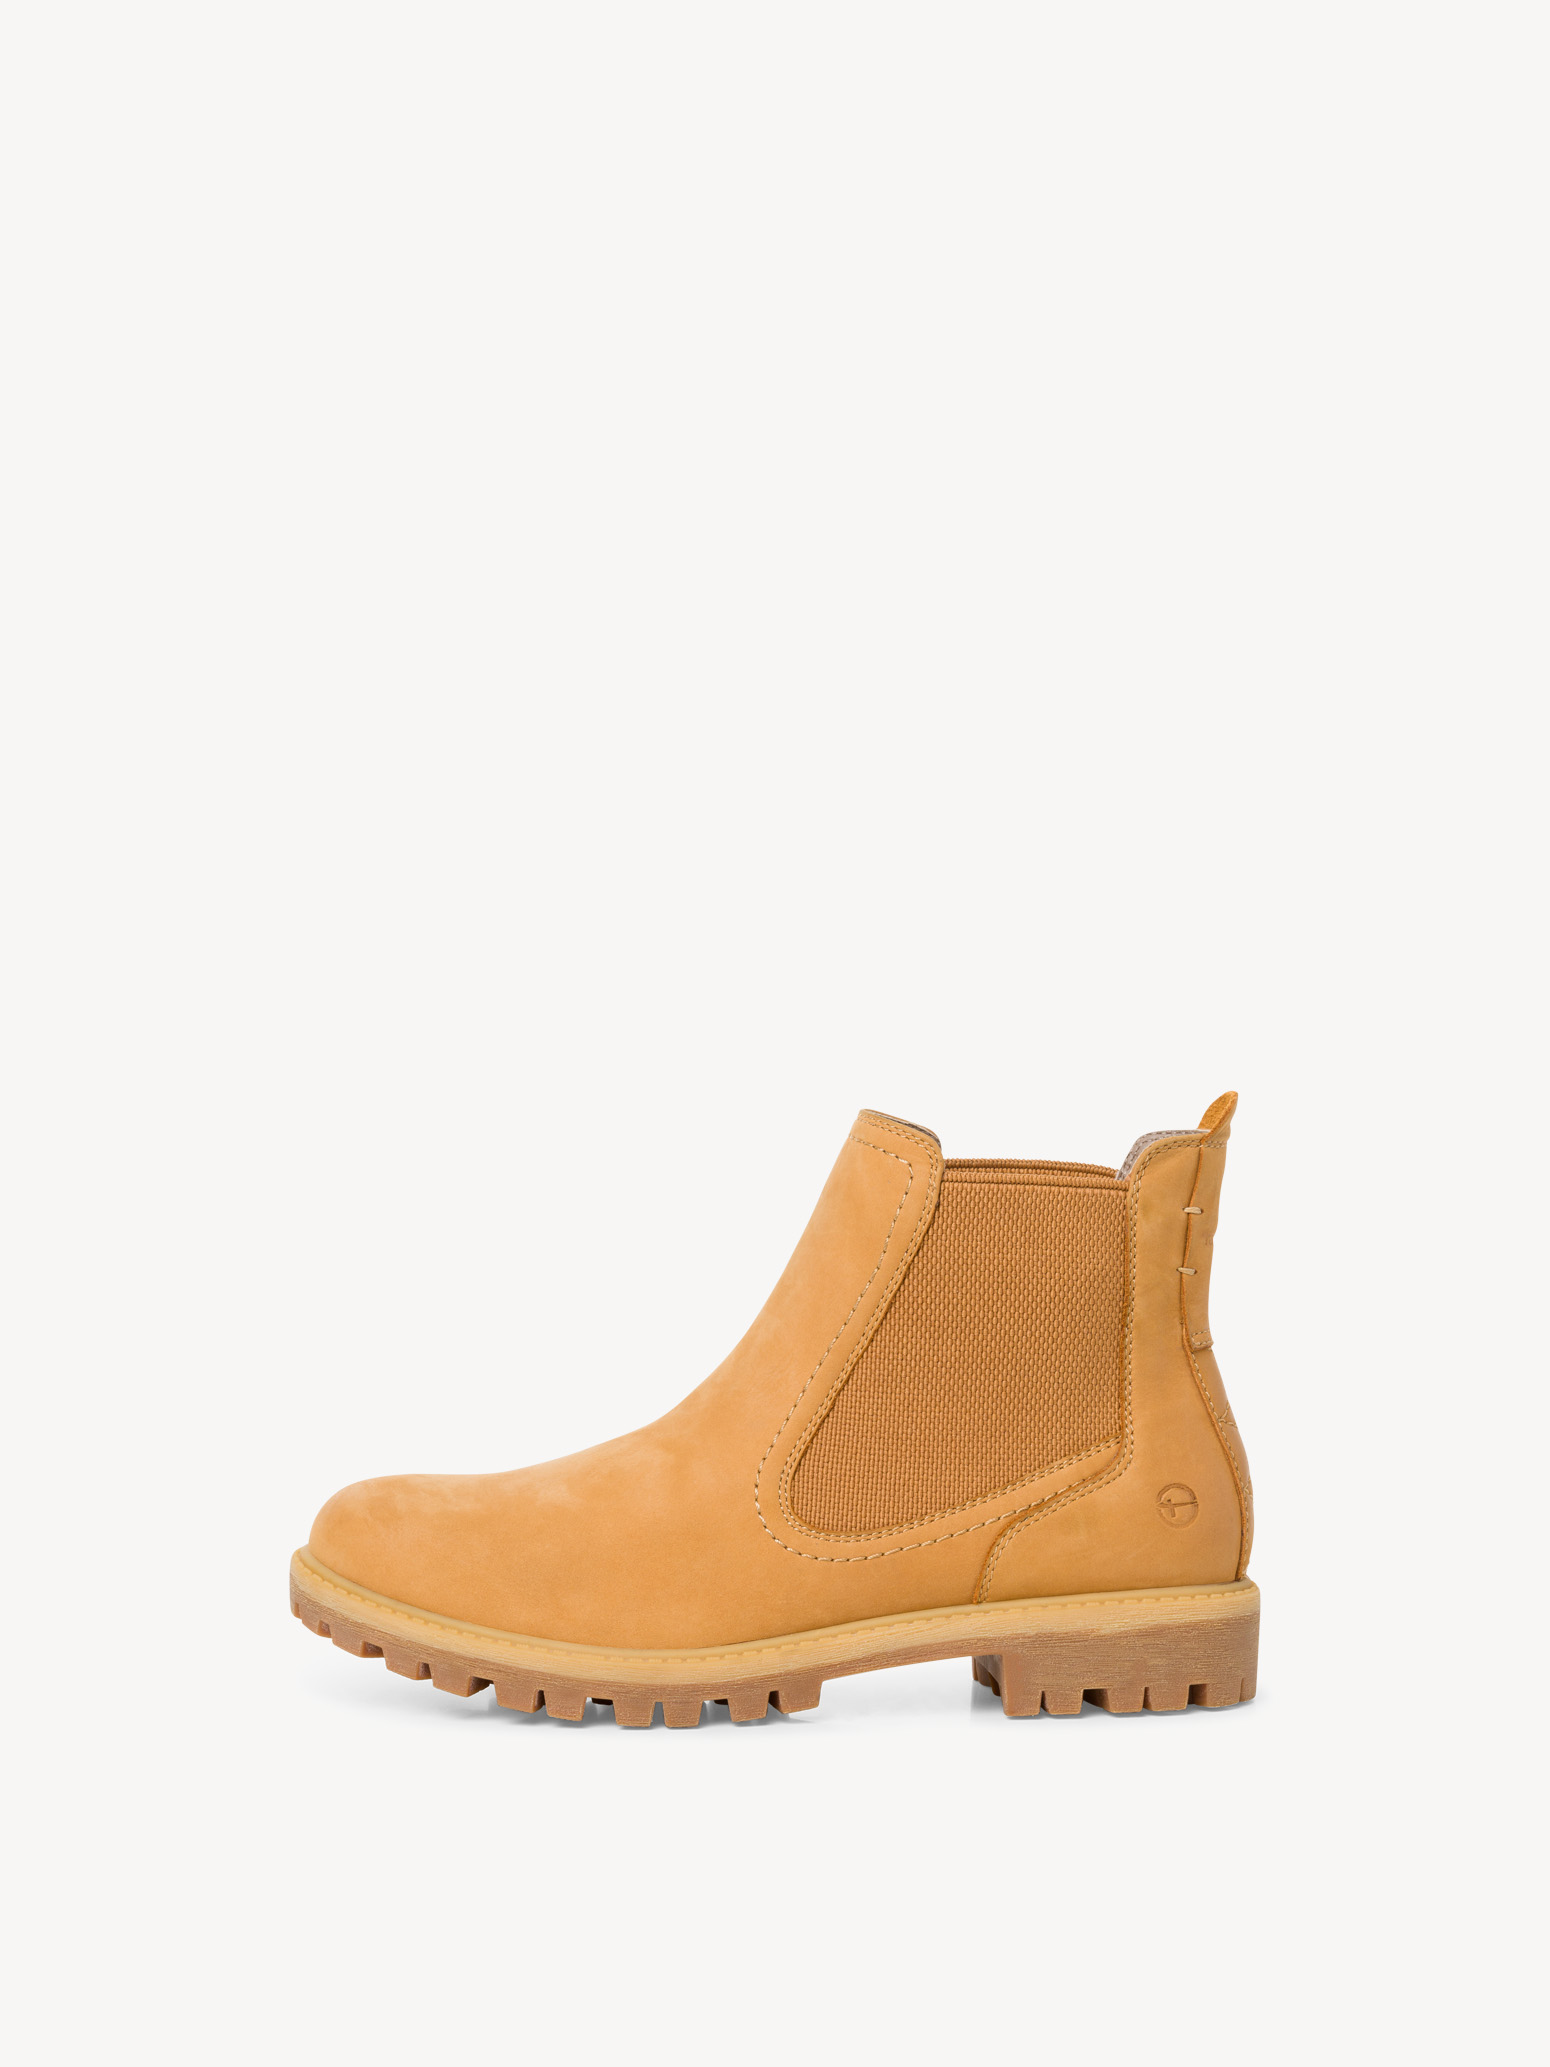 Leather Chelsea boot - yellow, CORN, hi-res